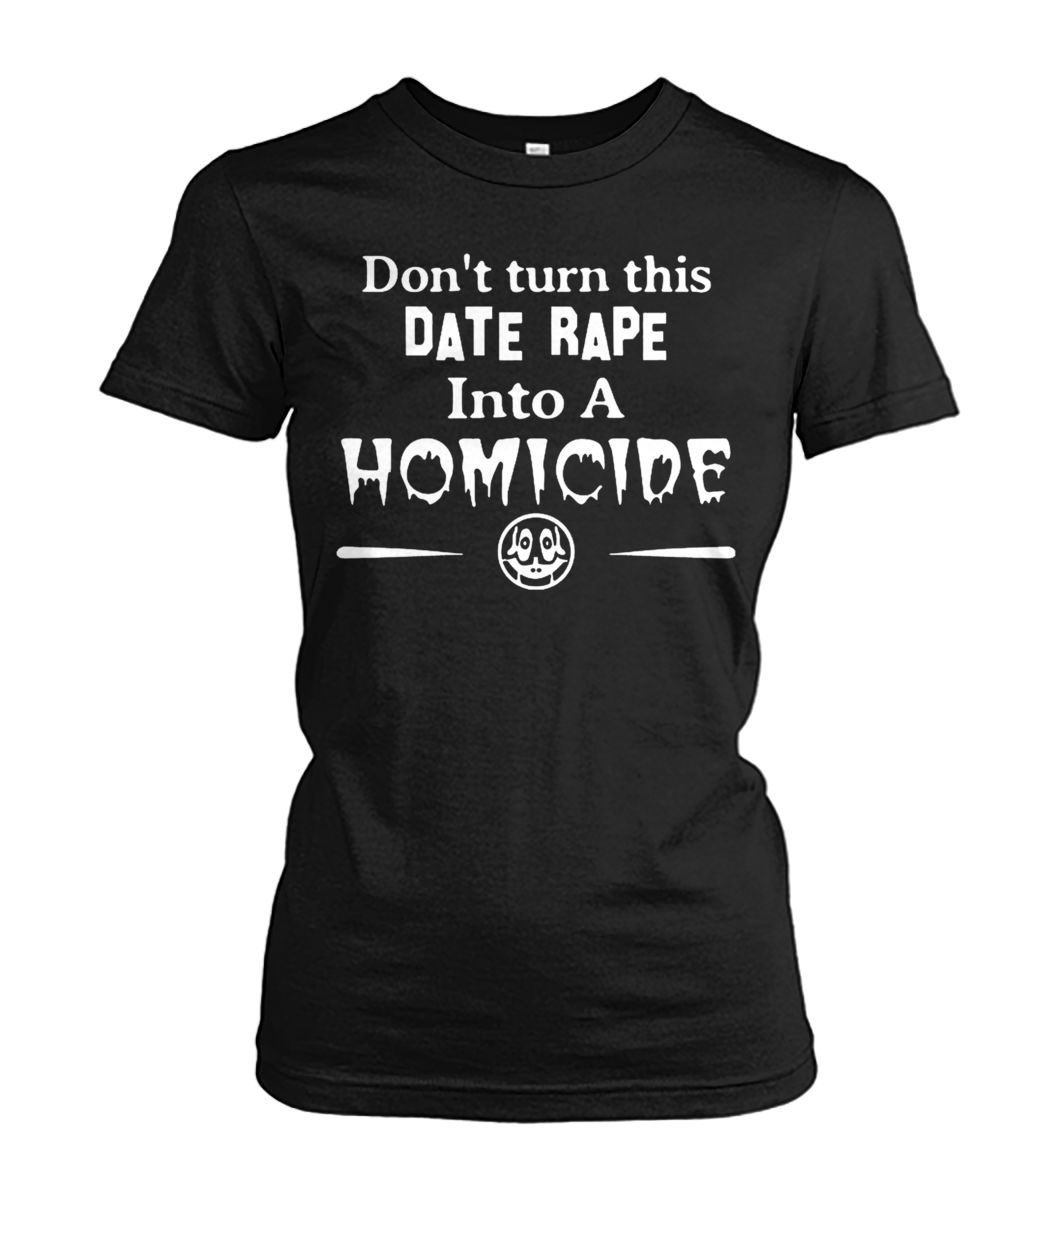 Don't turn this date rape into a homicide women's crew tee